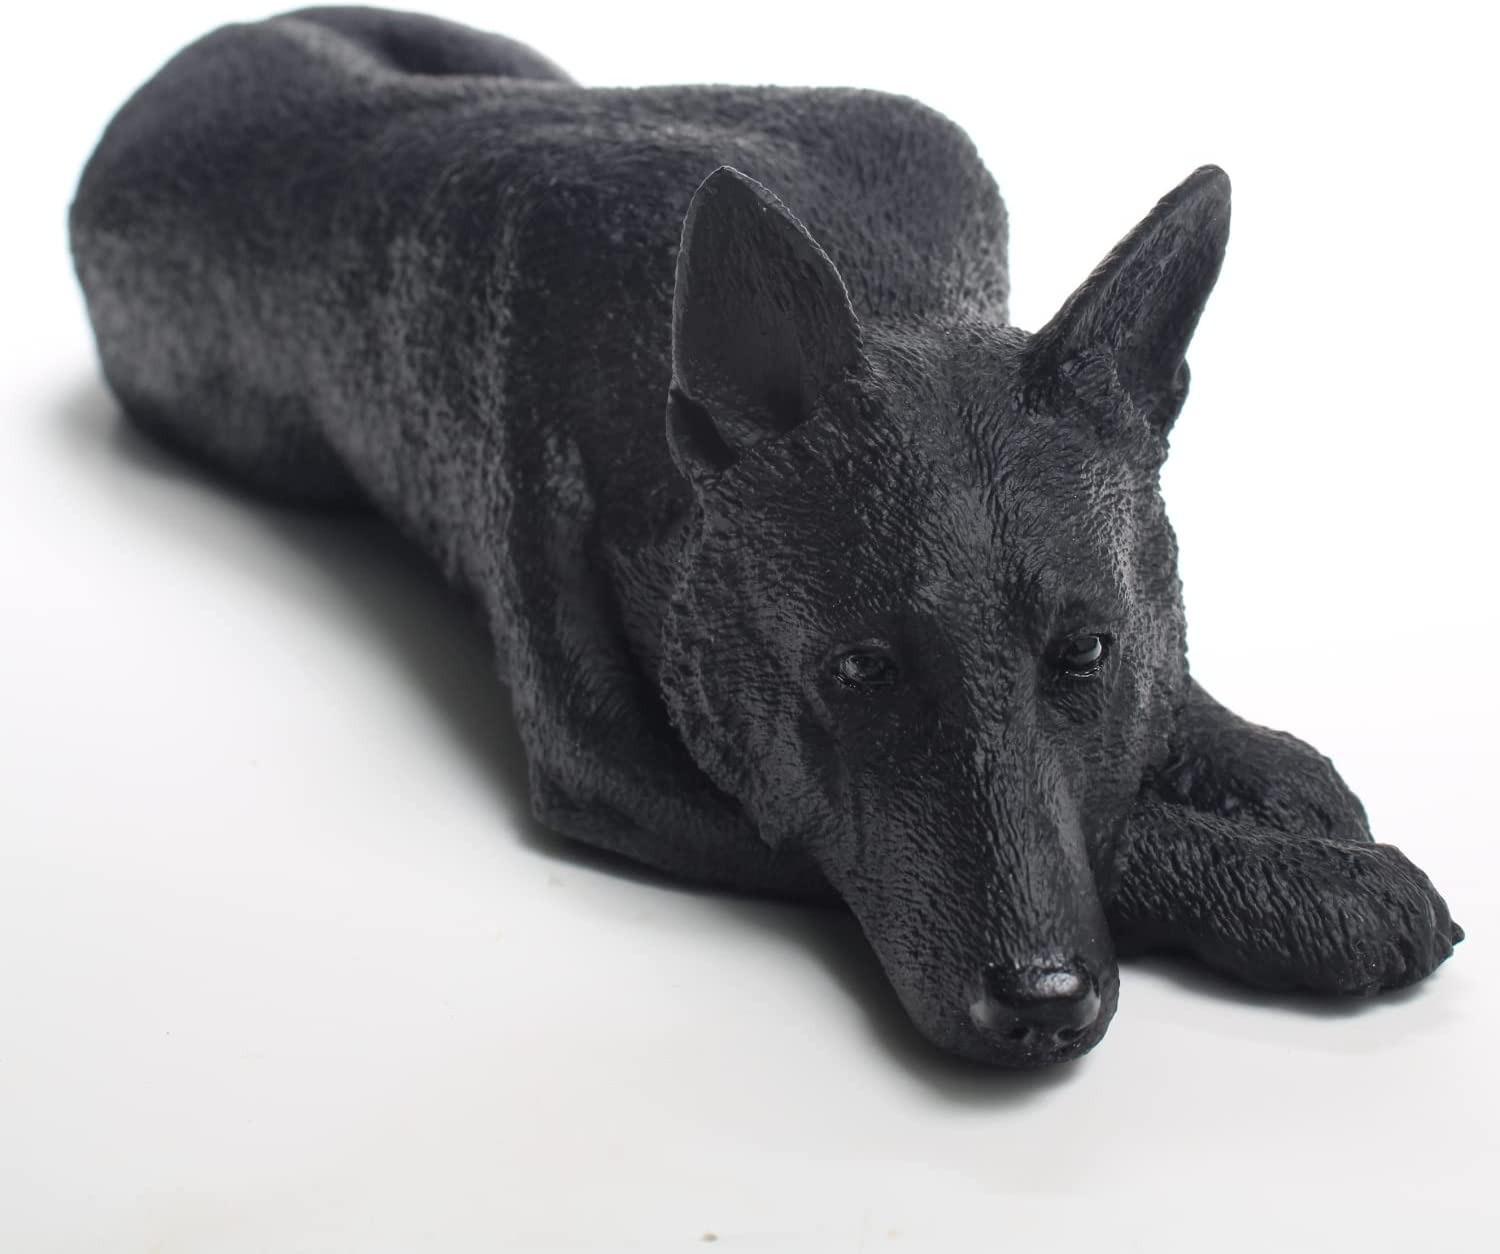 German Shepherd My Dog Figurine, A Perfect Decor for Any Home As Well As A Beaut